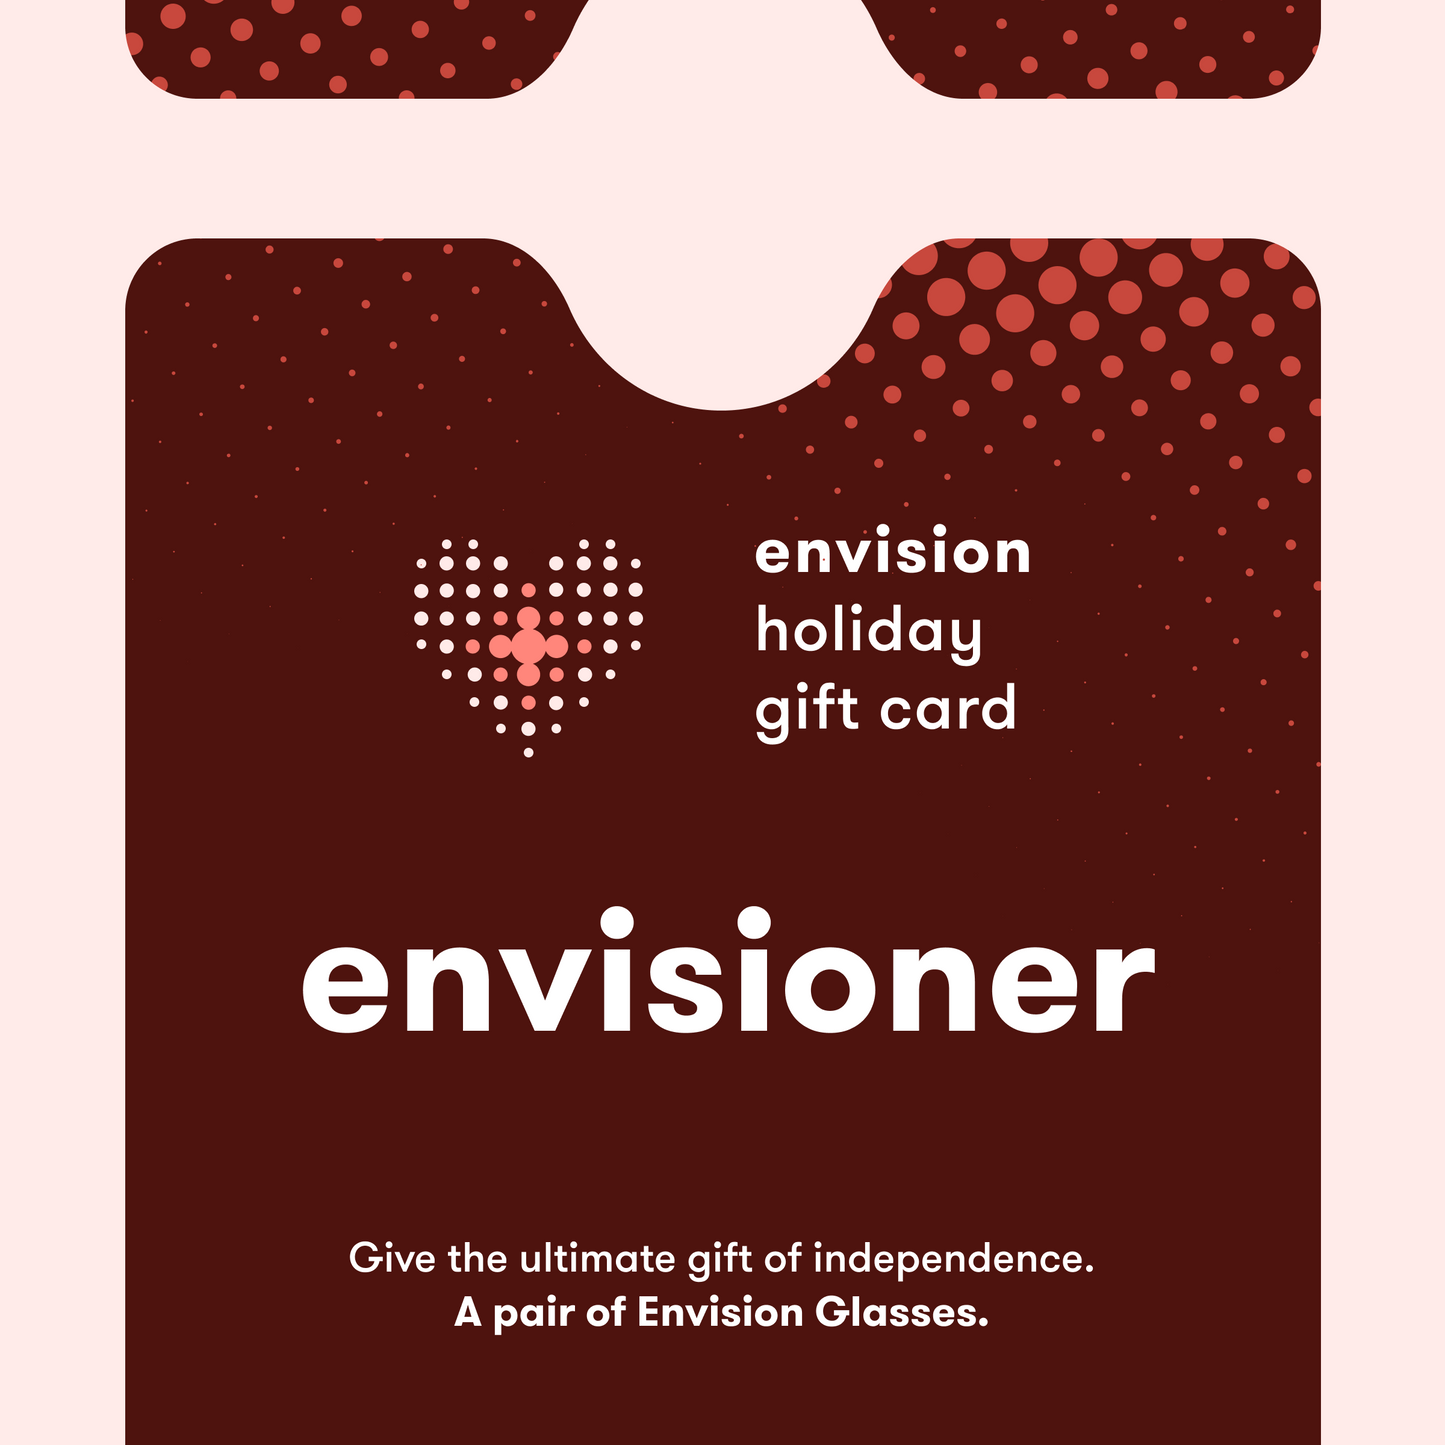 Illustration of a giftcard with the text stating: envision holiday gift card, envisioner, give the ultimate gift of independence. A pair of Envision Glasses.